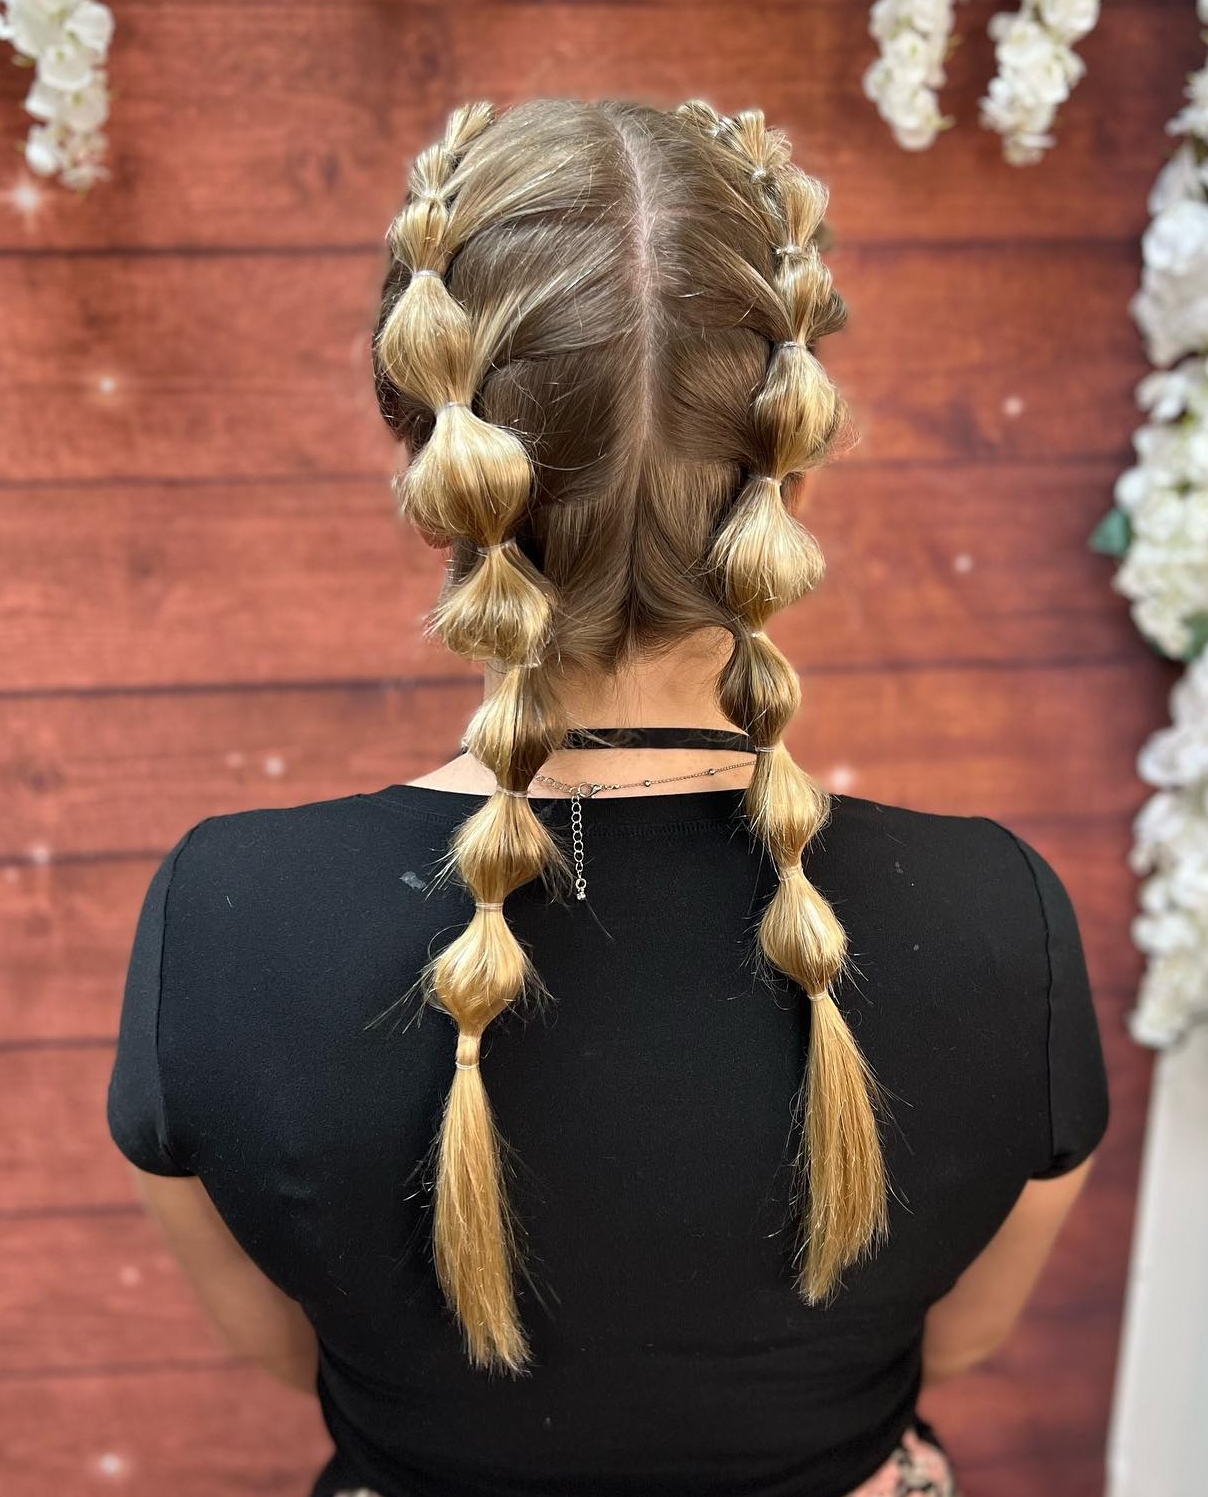 Pigtail Bubble Braids on Long Blonde Hair